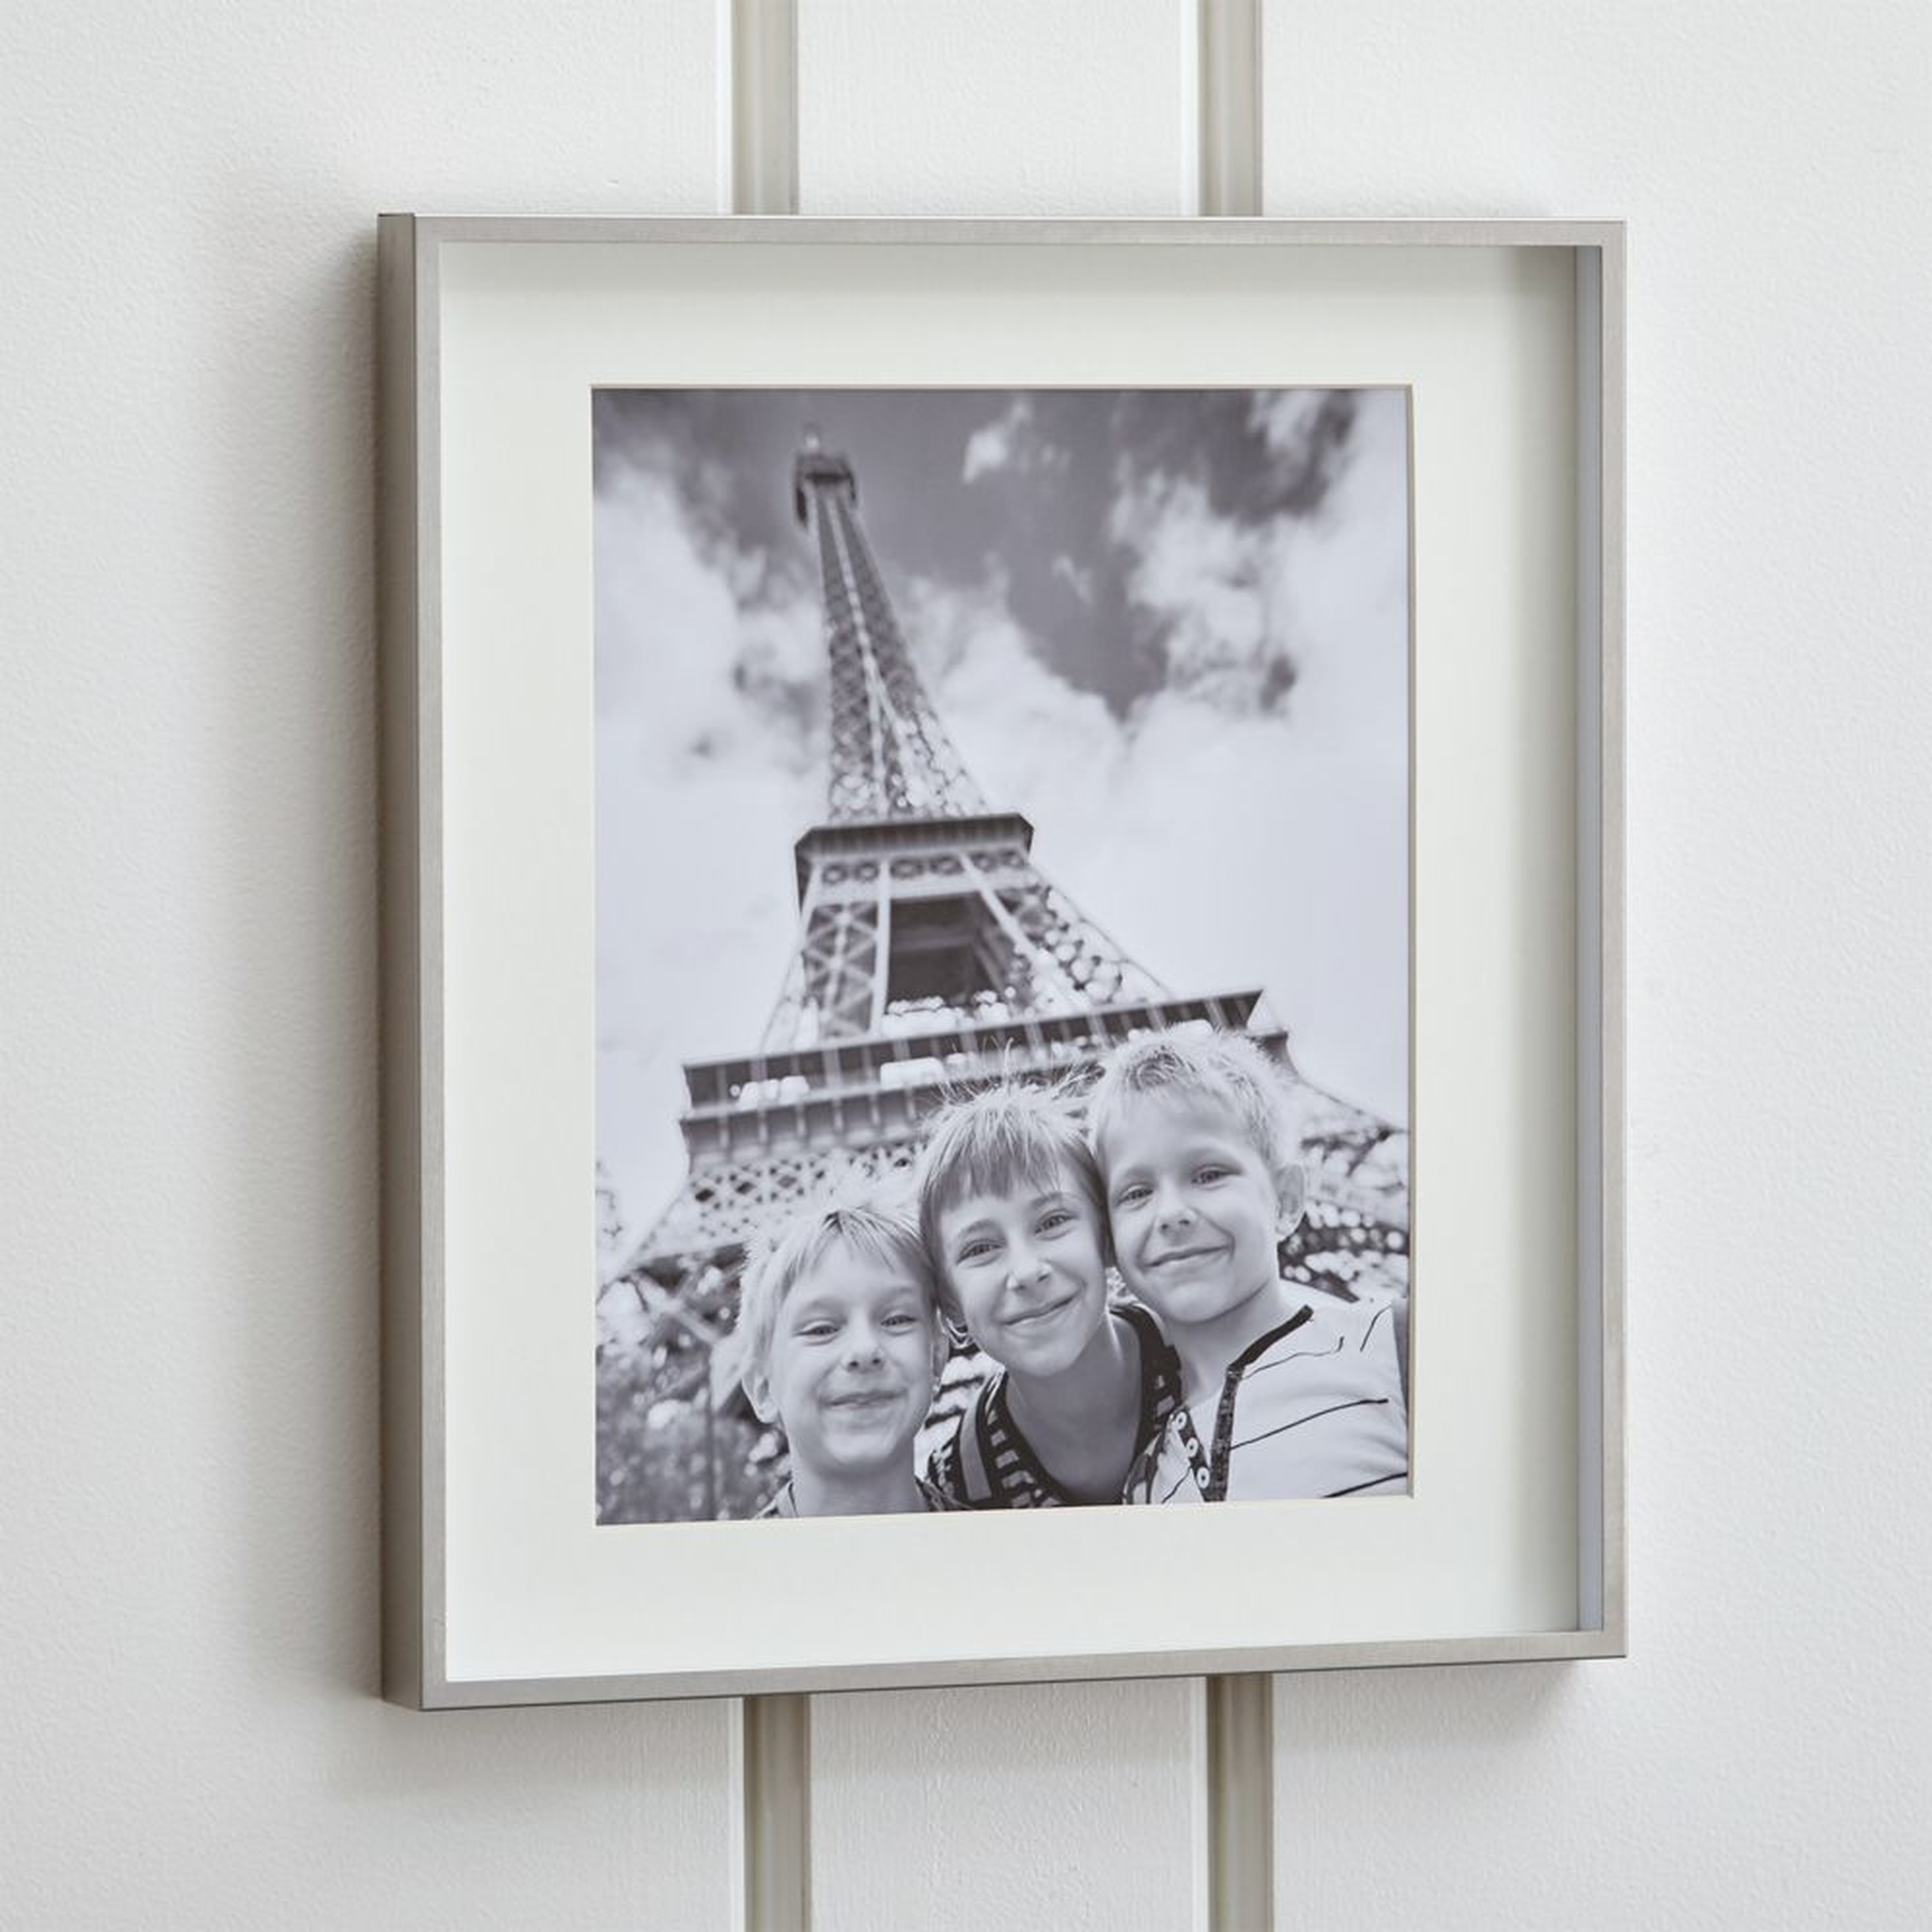 Brushed Silver 11x14 Wall Picture Frame - Crate and Barrel